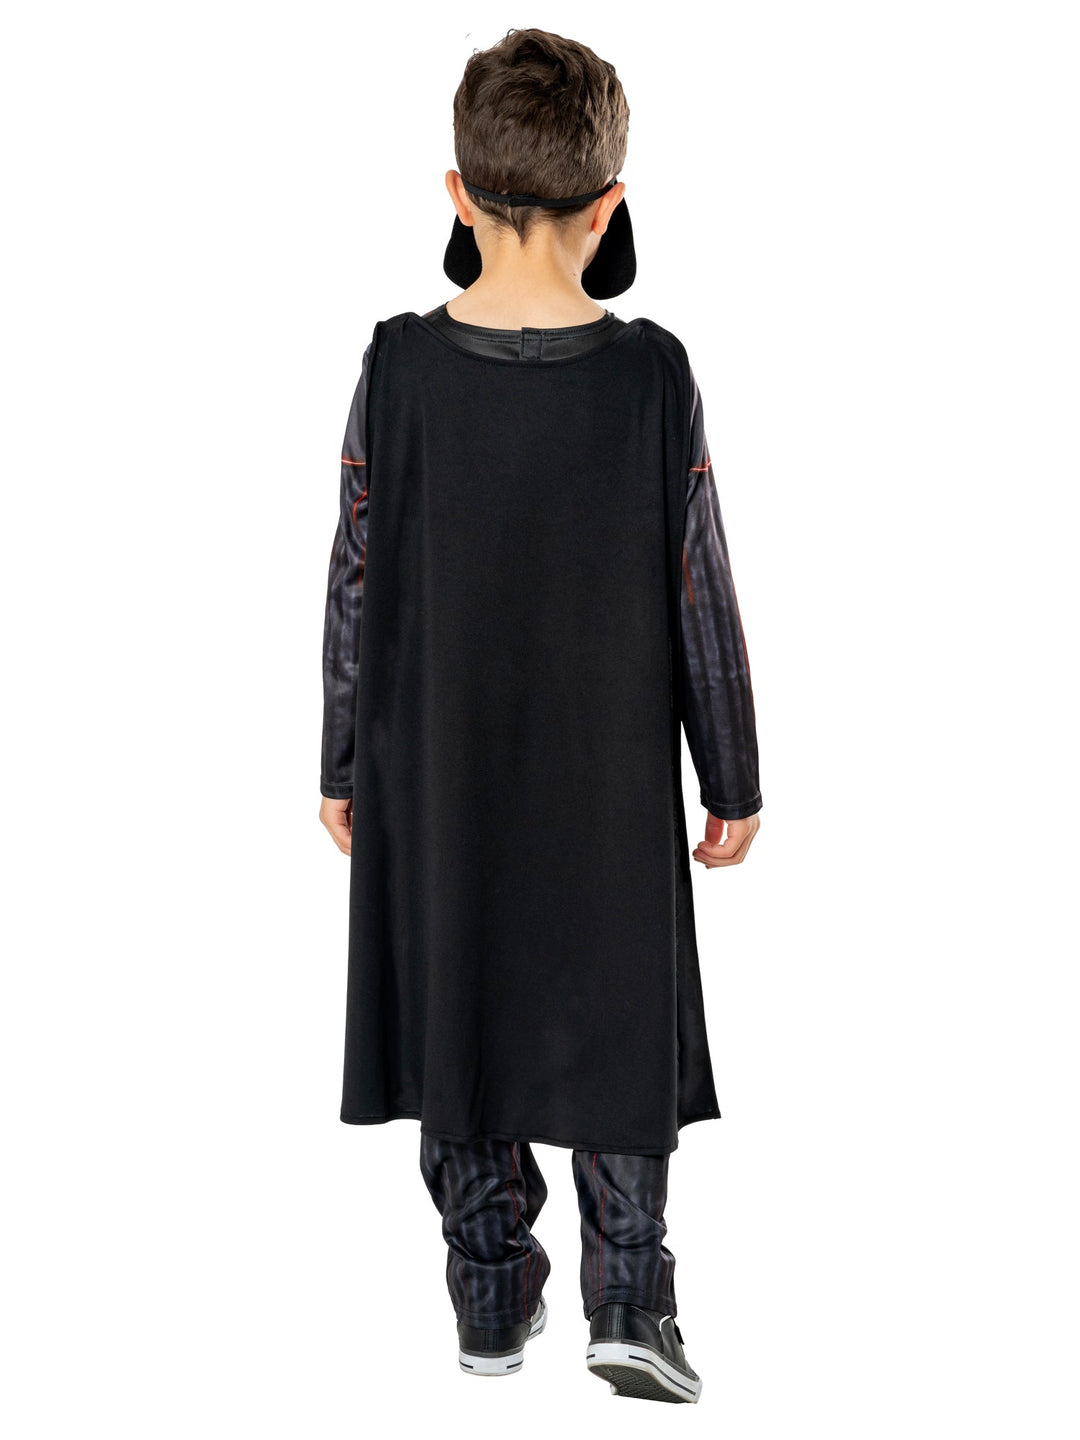 Darth Vader Costume Kids Green Collection_2